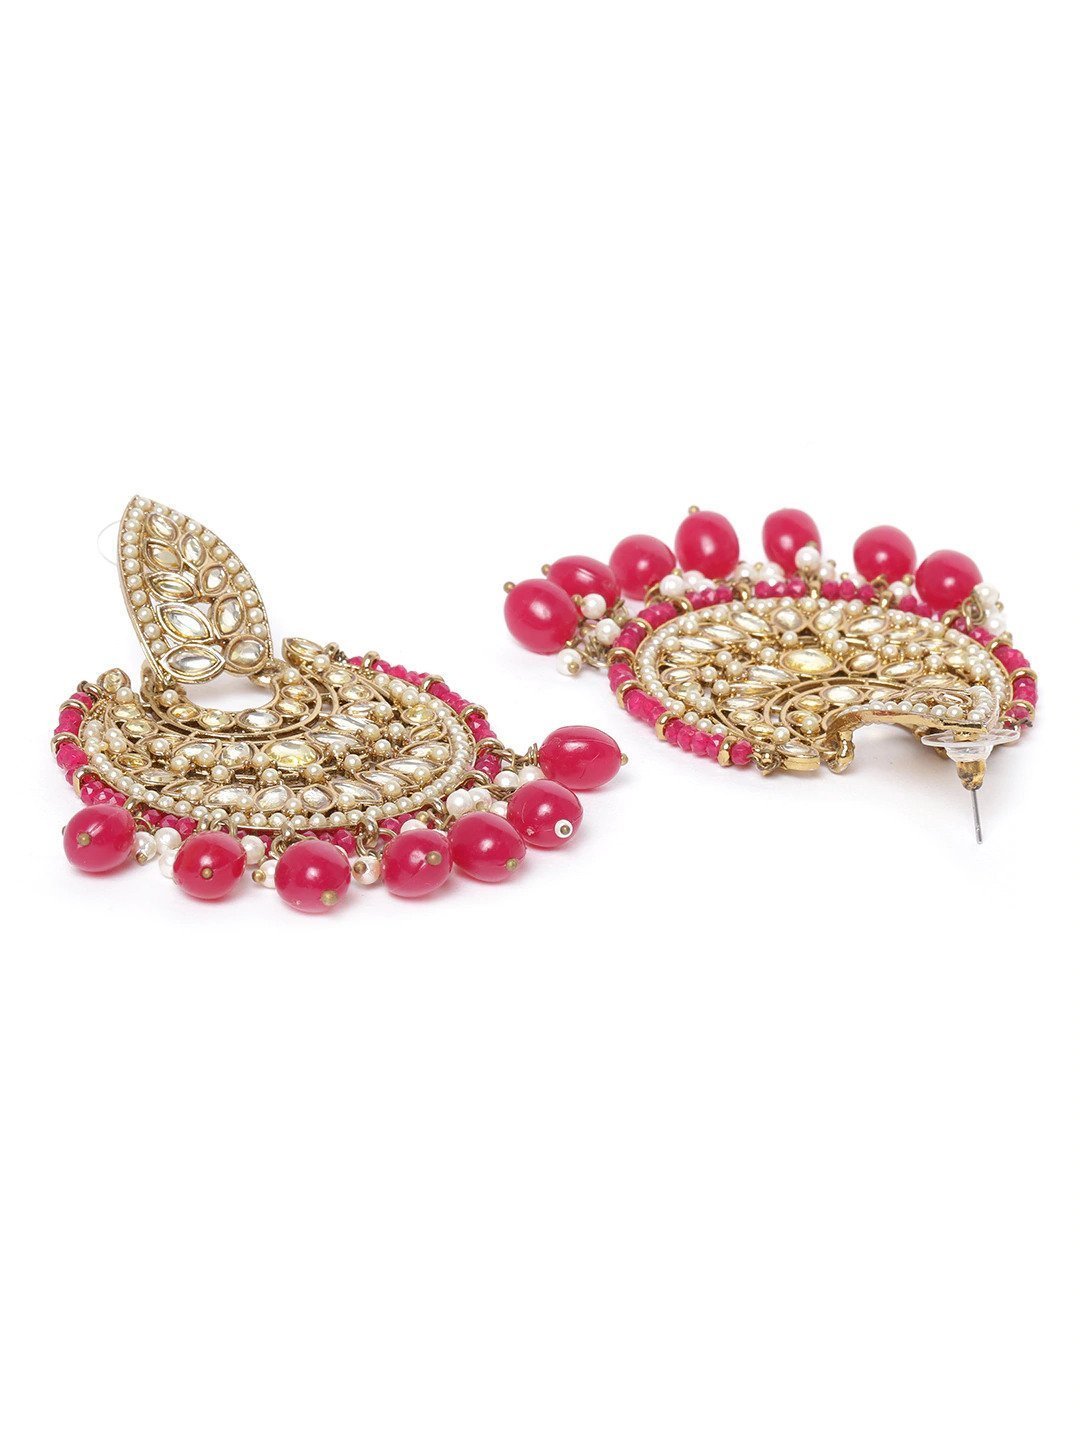 Women's Gold-Plated Stone Studded Chandbali With Mehroon Beads - Priyaasi